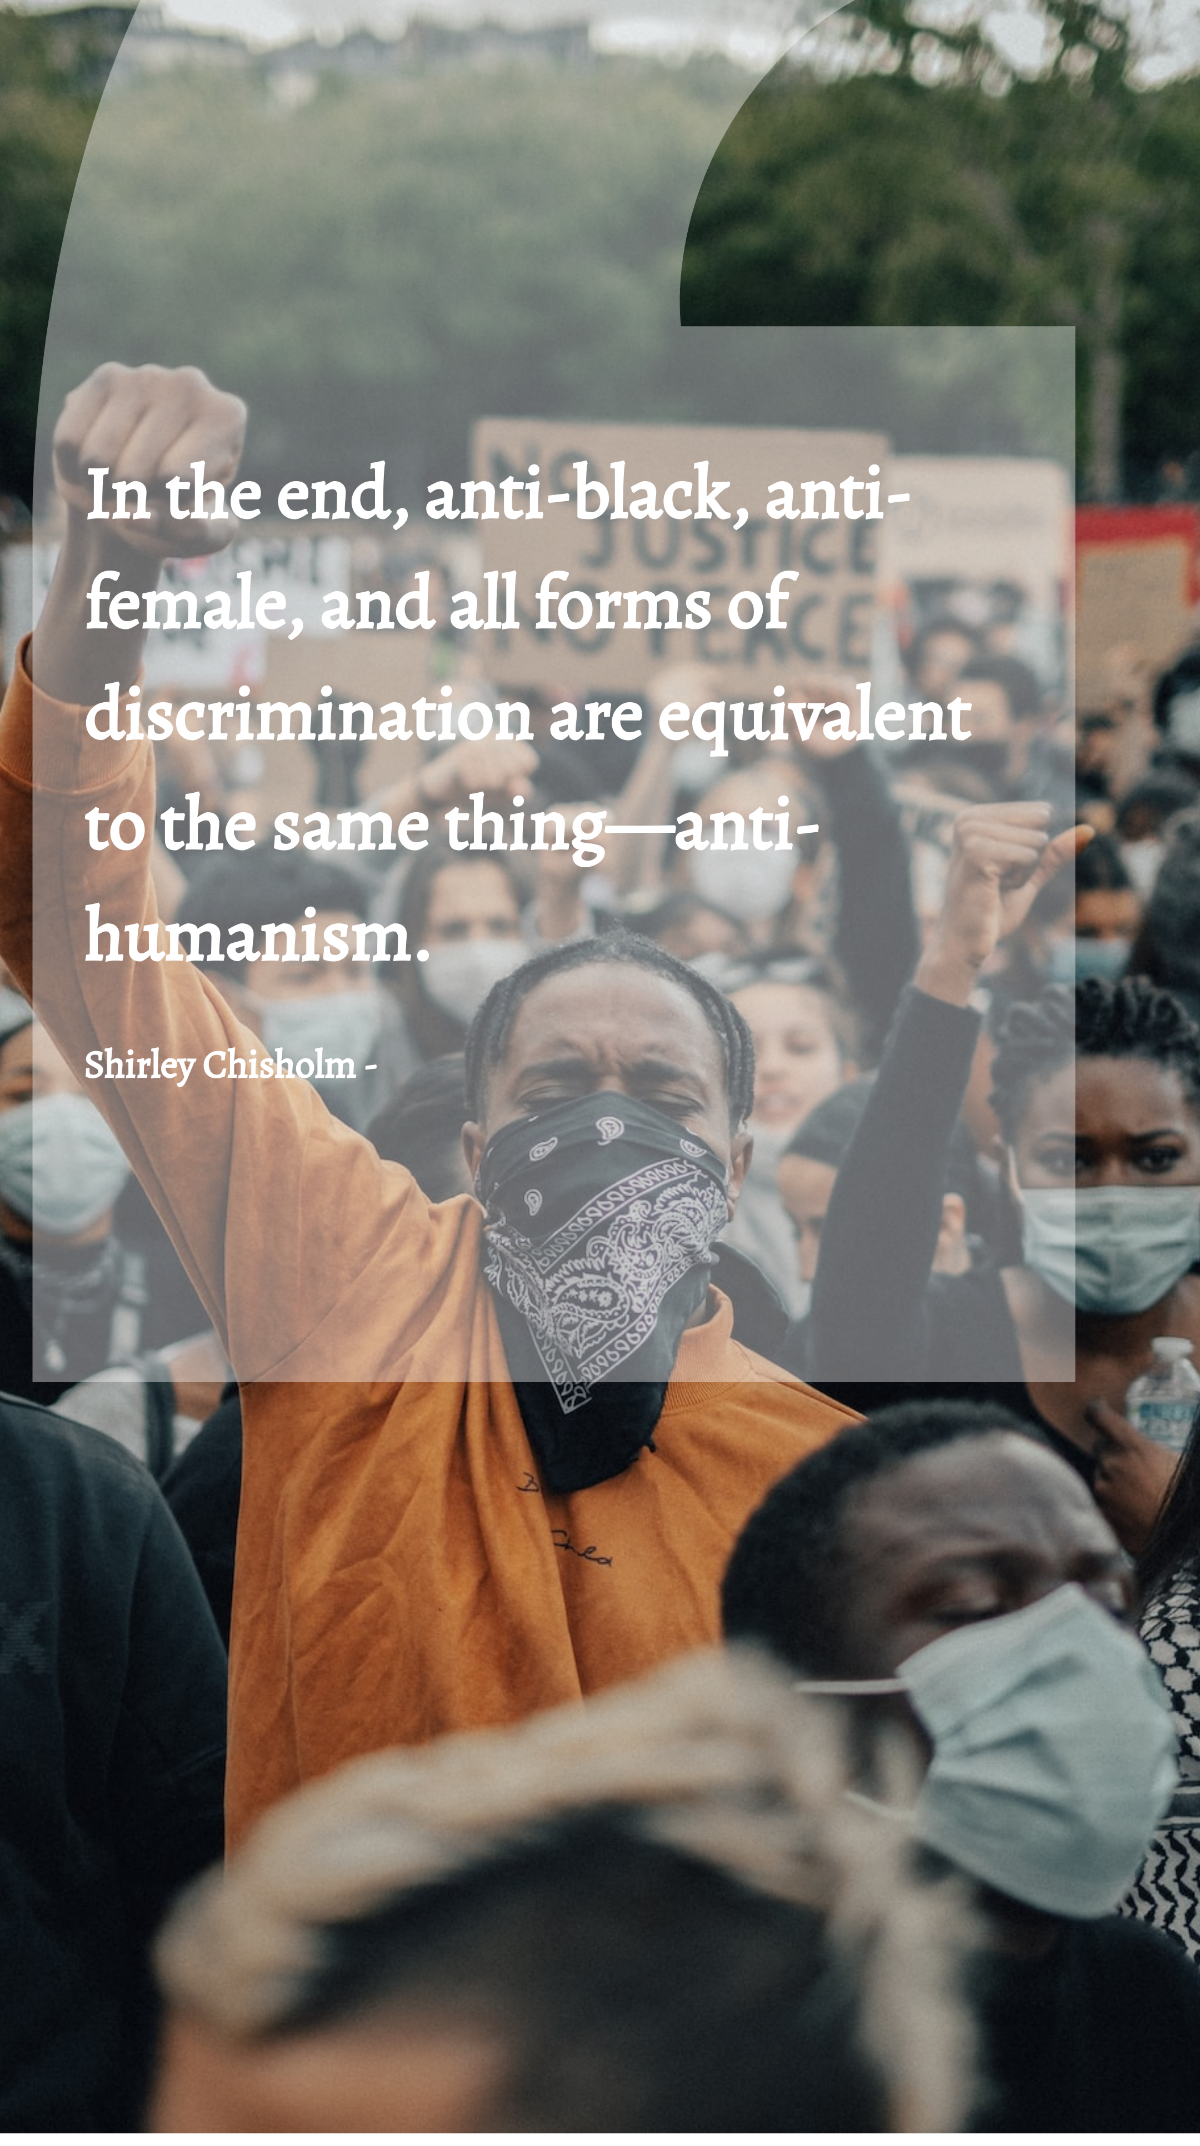 Shirley Chisholm - In the end, anti-black, anti-female, and all forms of discrimination are equivalent to the same thing—anti-humanism. Template